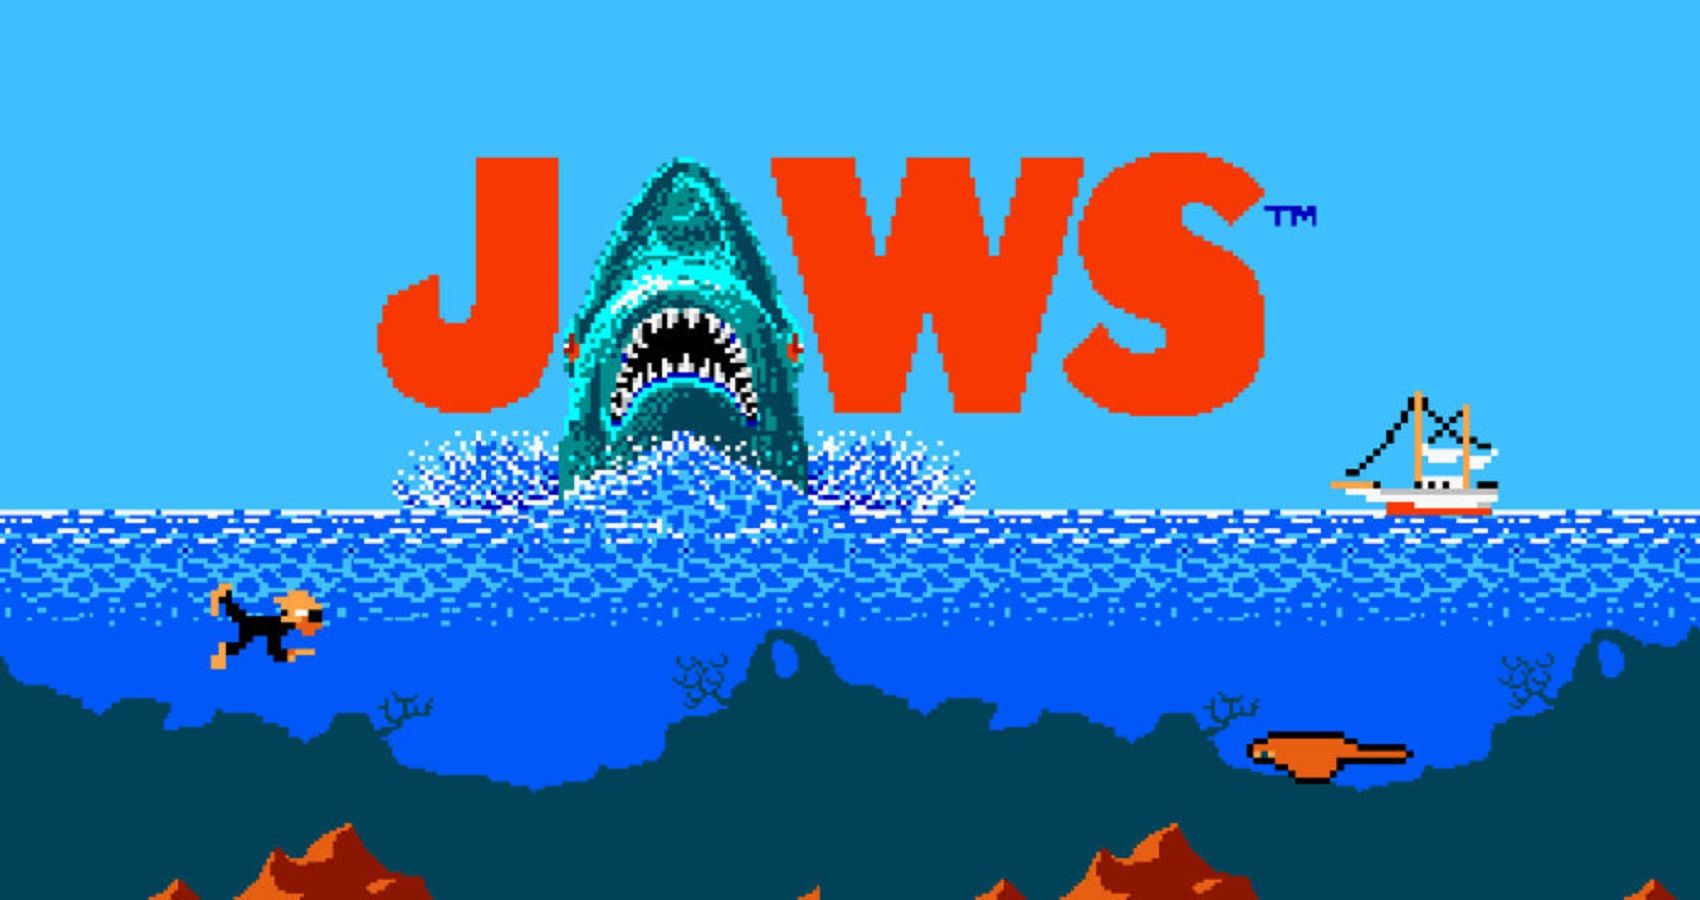 Far nintendo. Jaws NES. Jaws NES game. Jaws Nintendo Entertainment System. Jaws NES Cover.